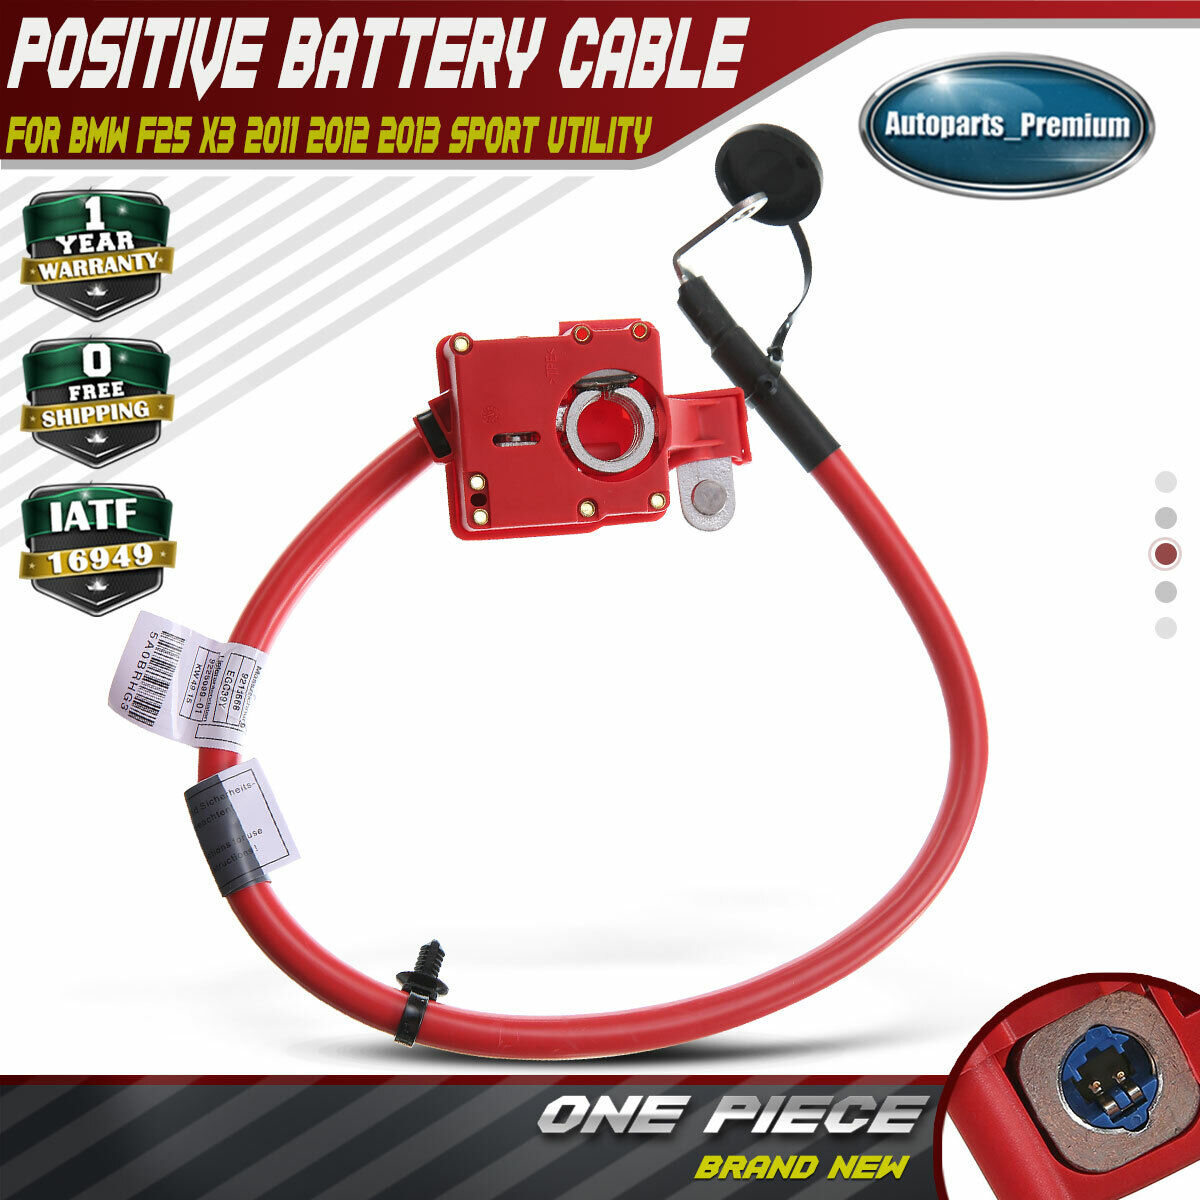 Positive Battery Cable for BMW F25 X3 xDrive28i 35i 2011 2012 2013 61129225099